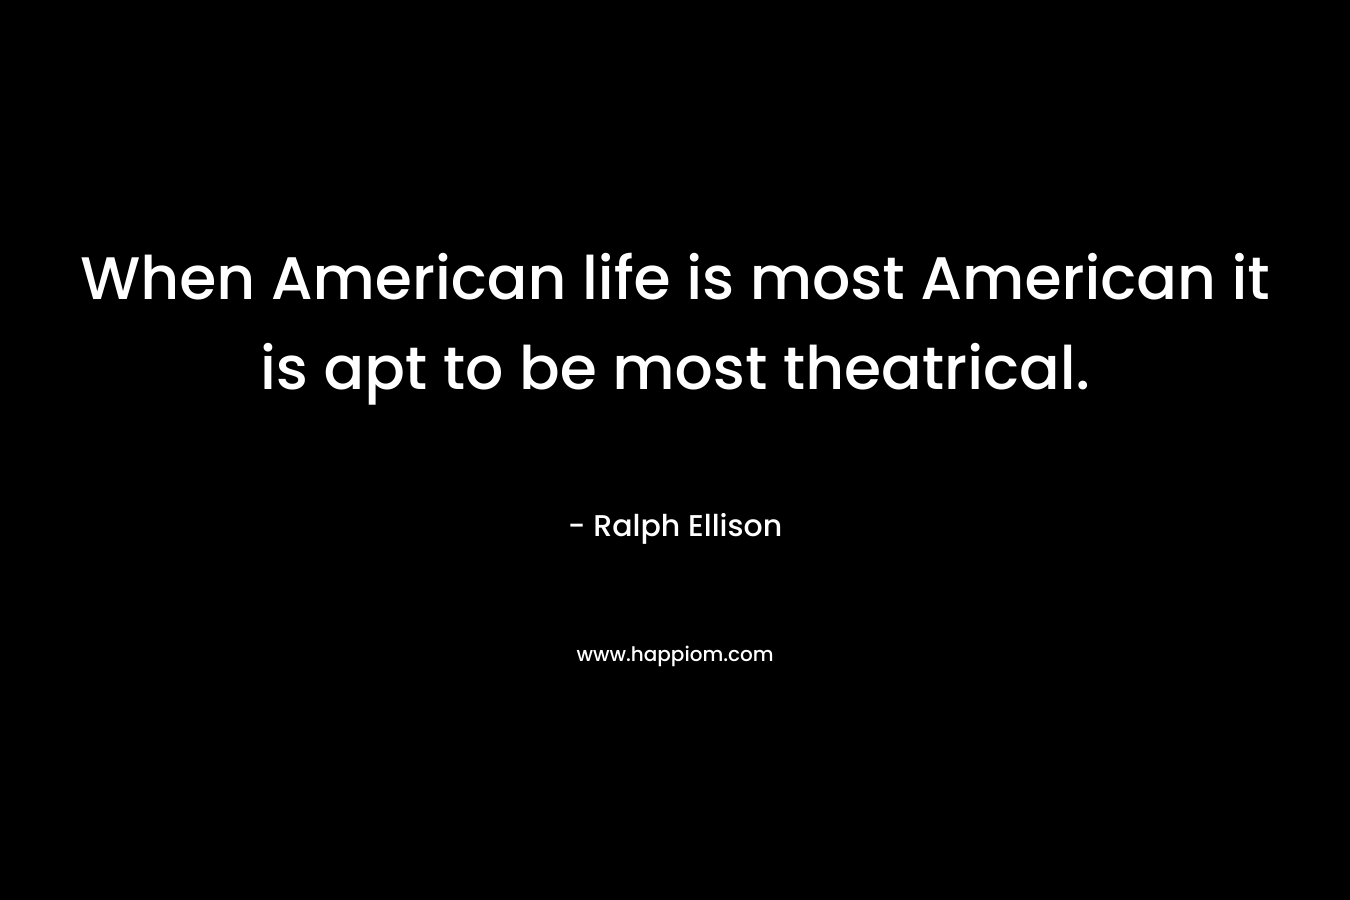 When American life is most American it is apt to be most theatrical.